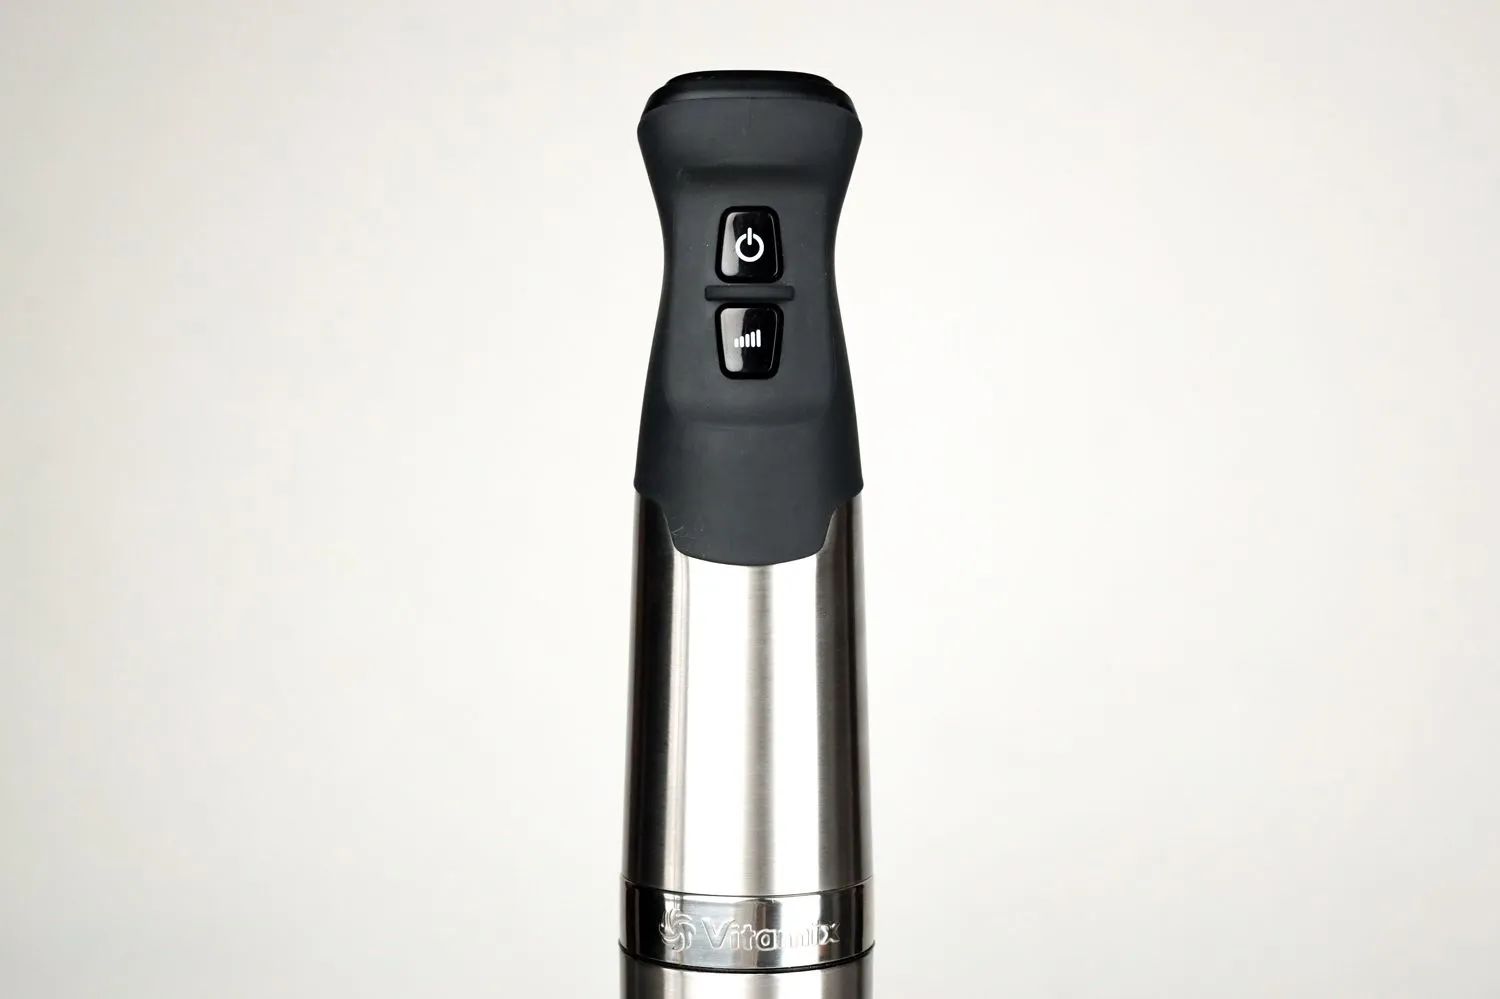 The Vitamix Immersion Blender Review: Better in Quality Than Most